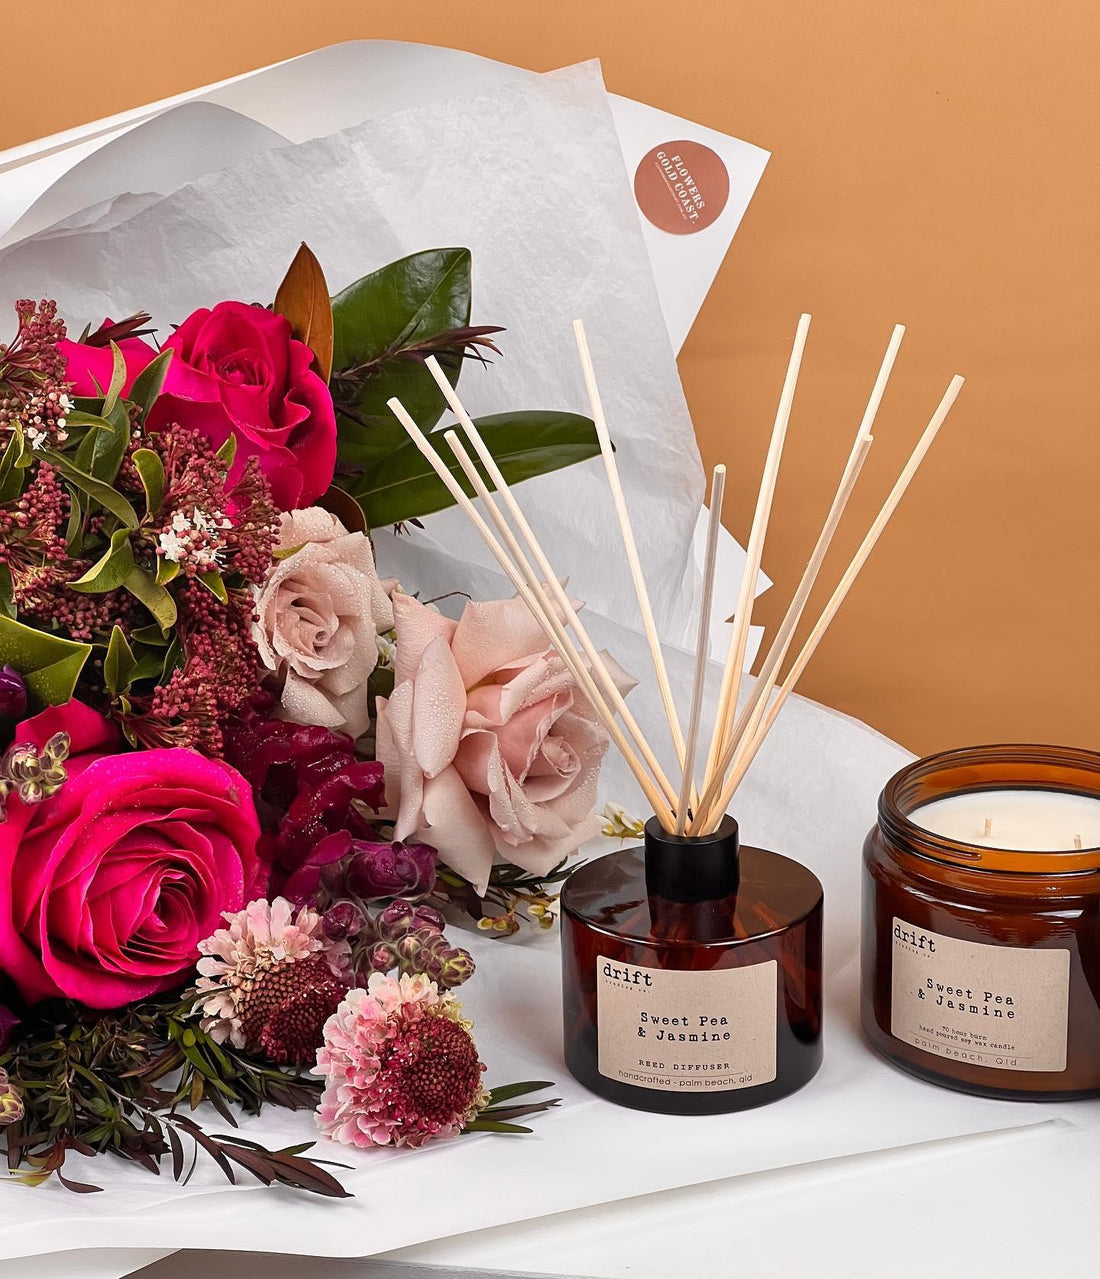 F L O R A L S &  S C E N T S 

Introducing our new Drift Reed Diffusers 🌸

You can now purchase y made with love by Flowers Gold Coast www.flowersgoldcoast.com.au the Gold Coast's best Florist- Same Day Flower Delivery